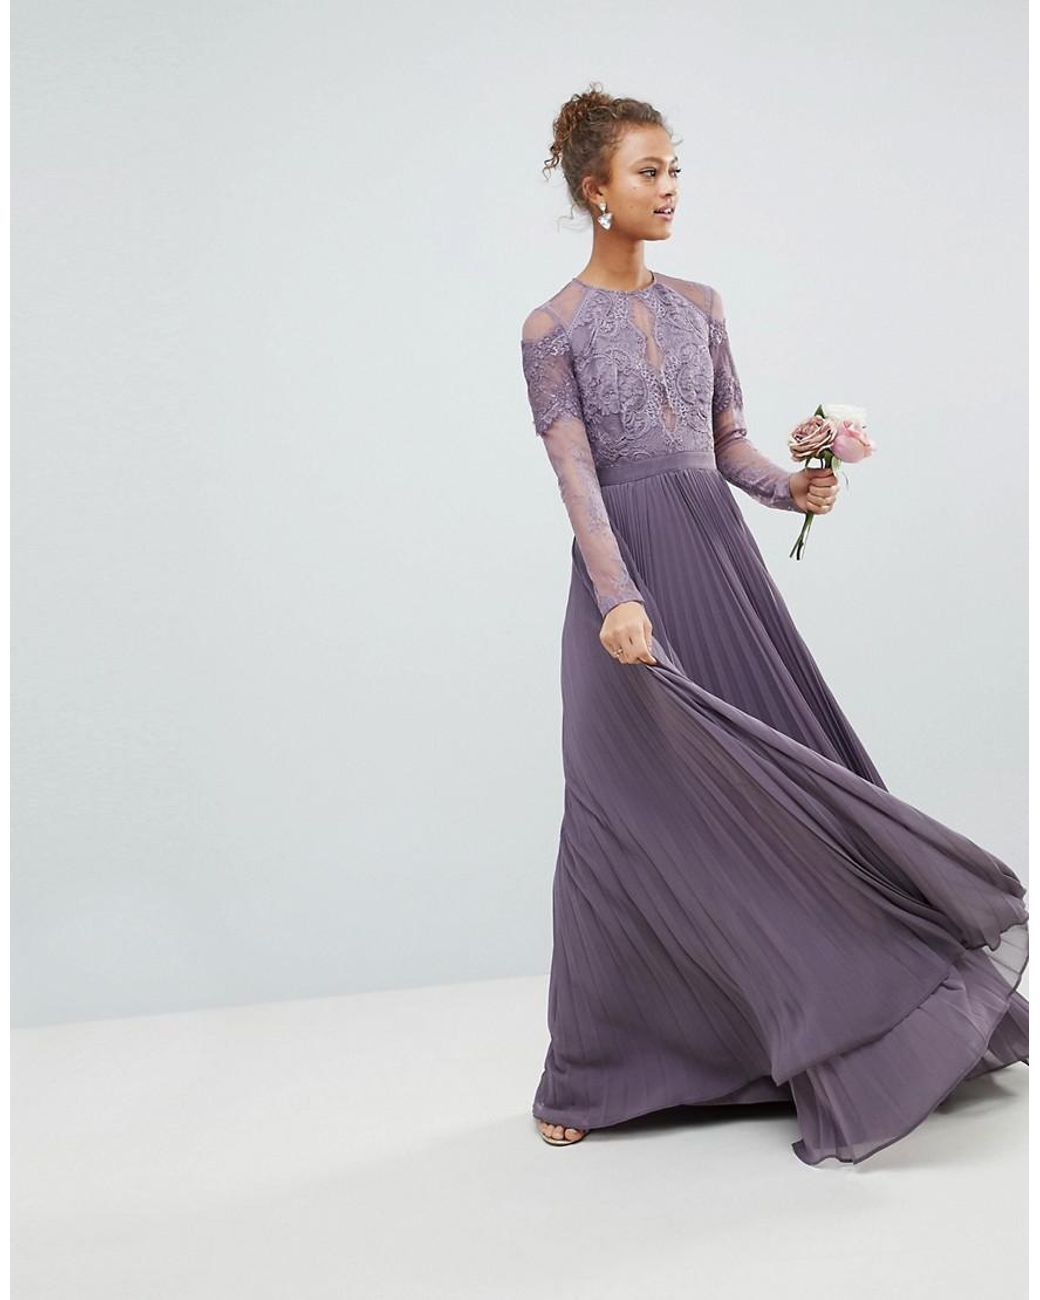 ASOS Asos Long Sleeve Lace Pleated Maxi Dress in Purple | Lyst UK